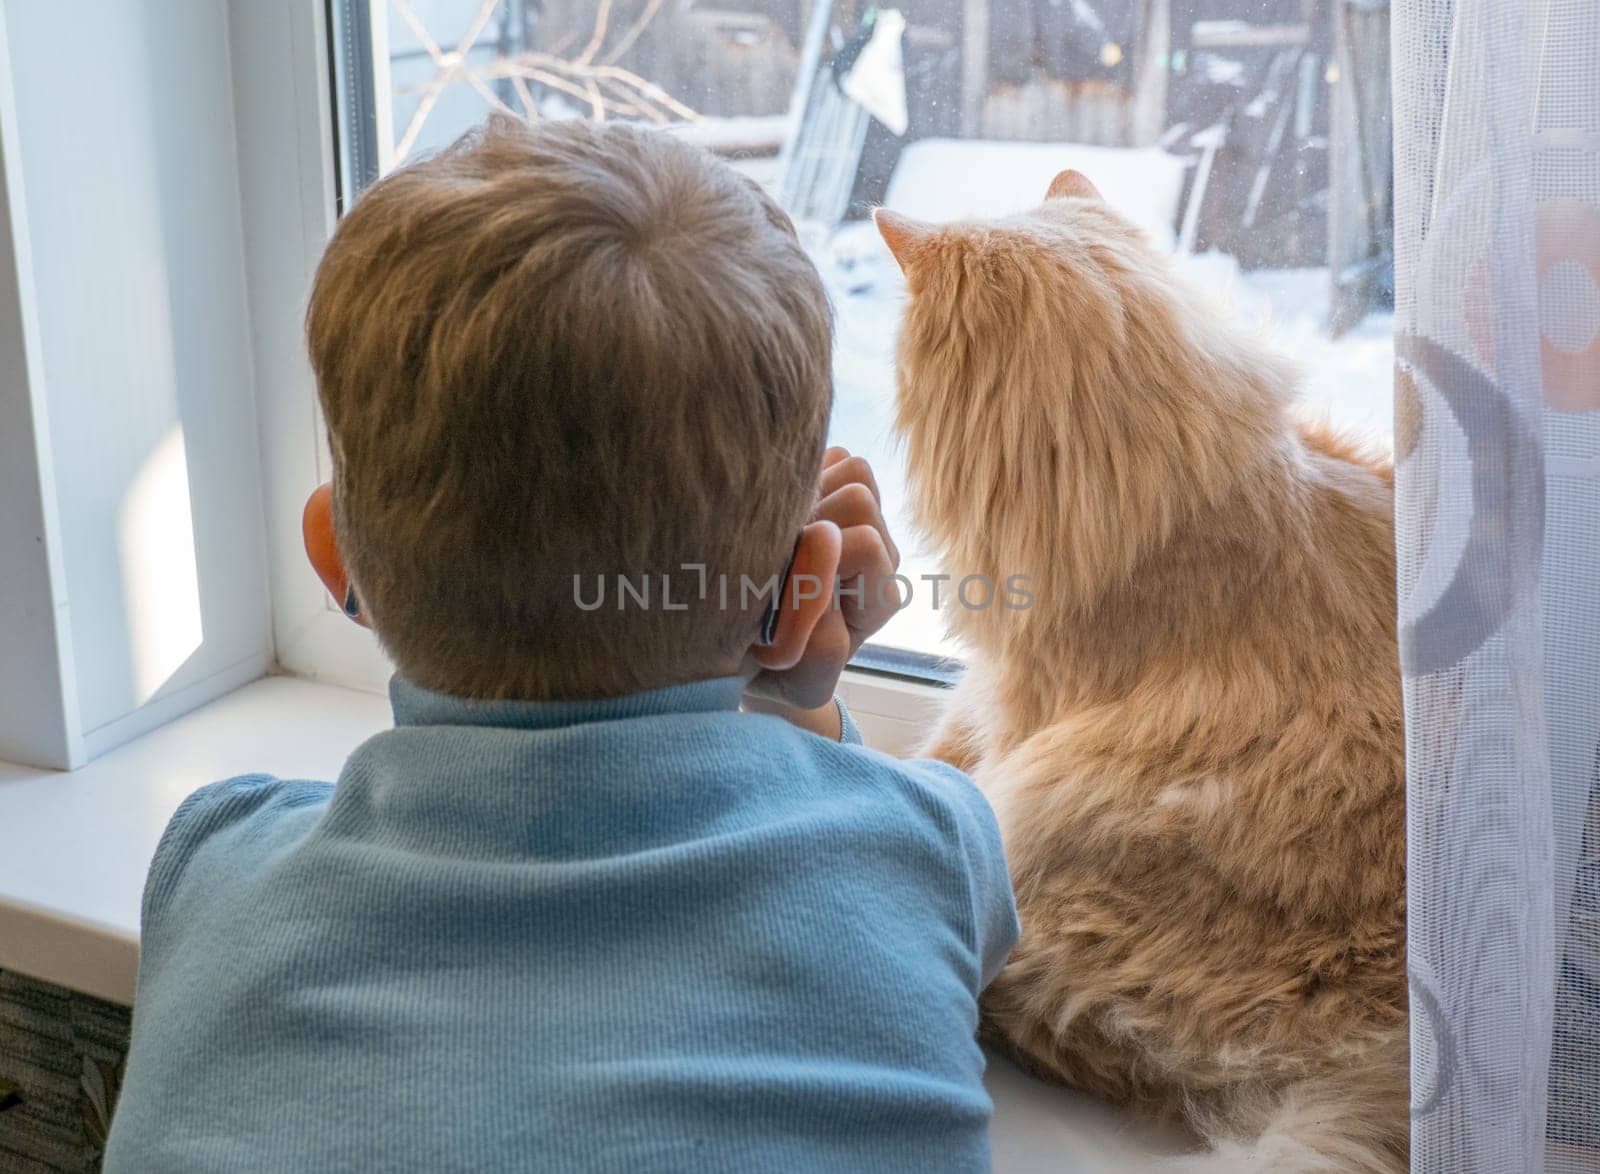 Beautiful scene: two friends looking out the window. Rear view of a little boy with a cat looking out the window, watching the falling snow, focusing on the cat.